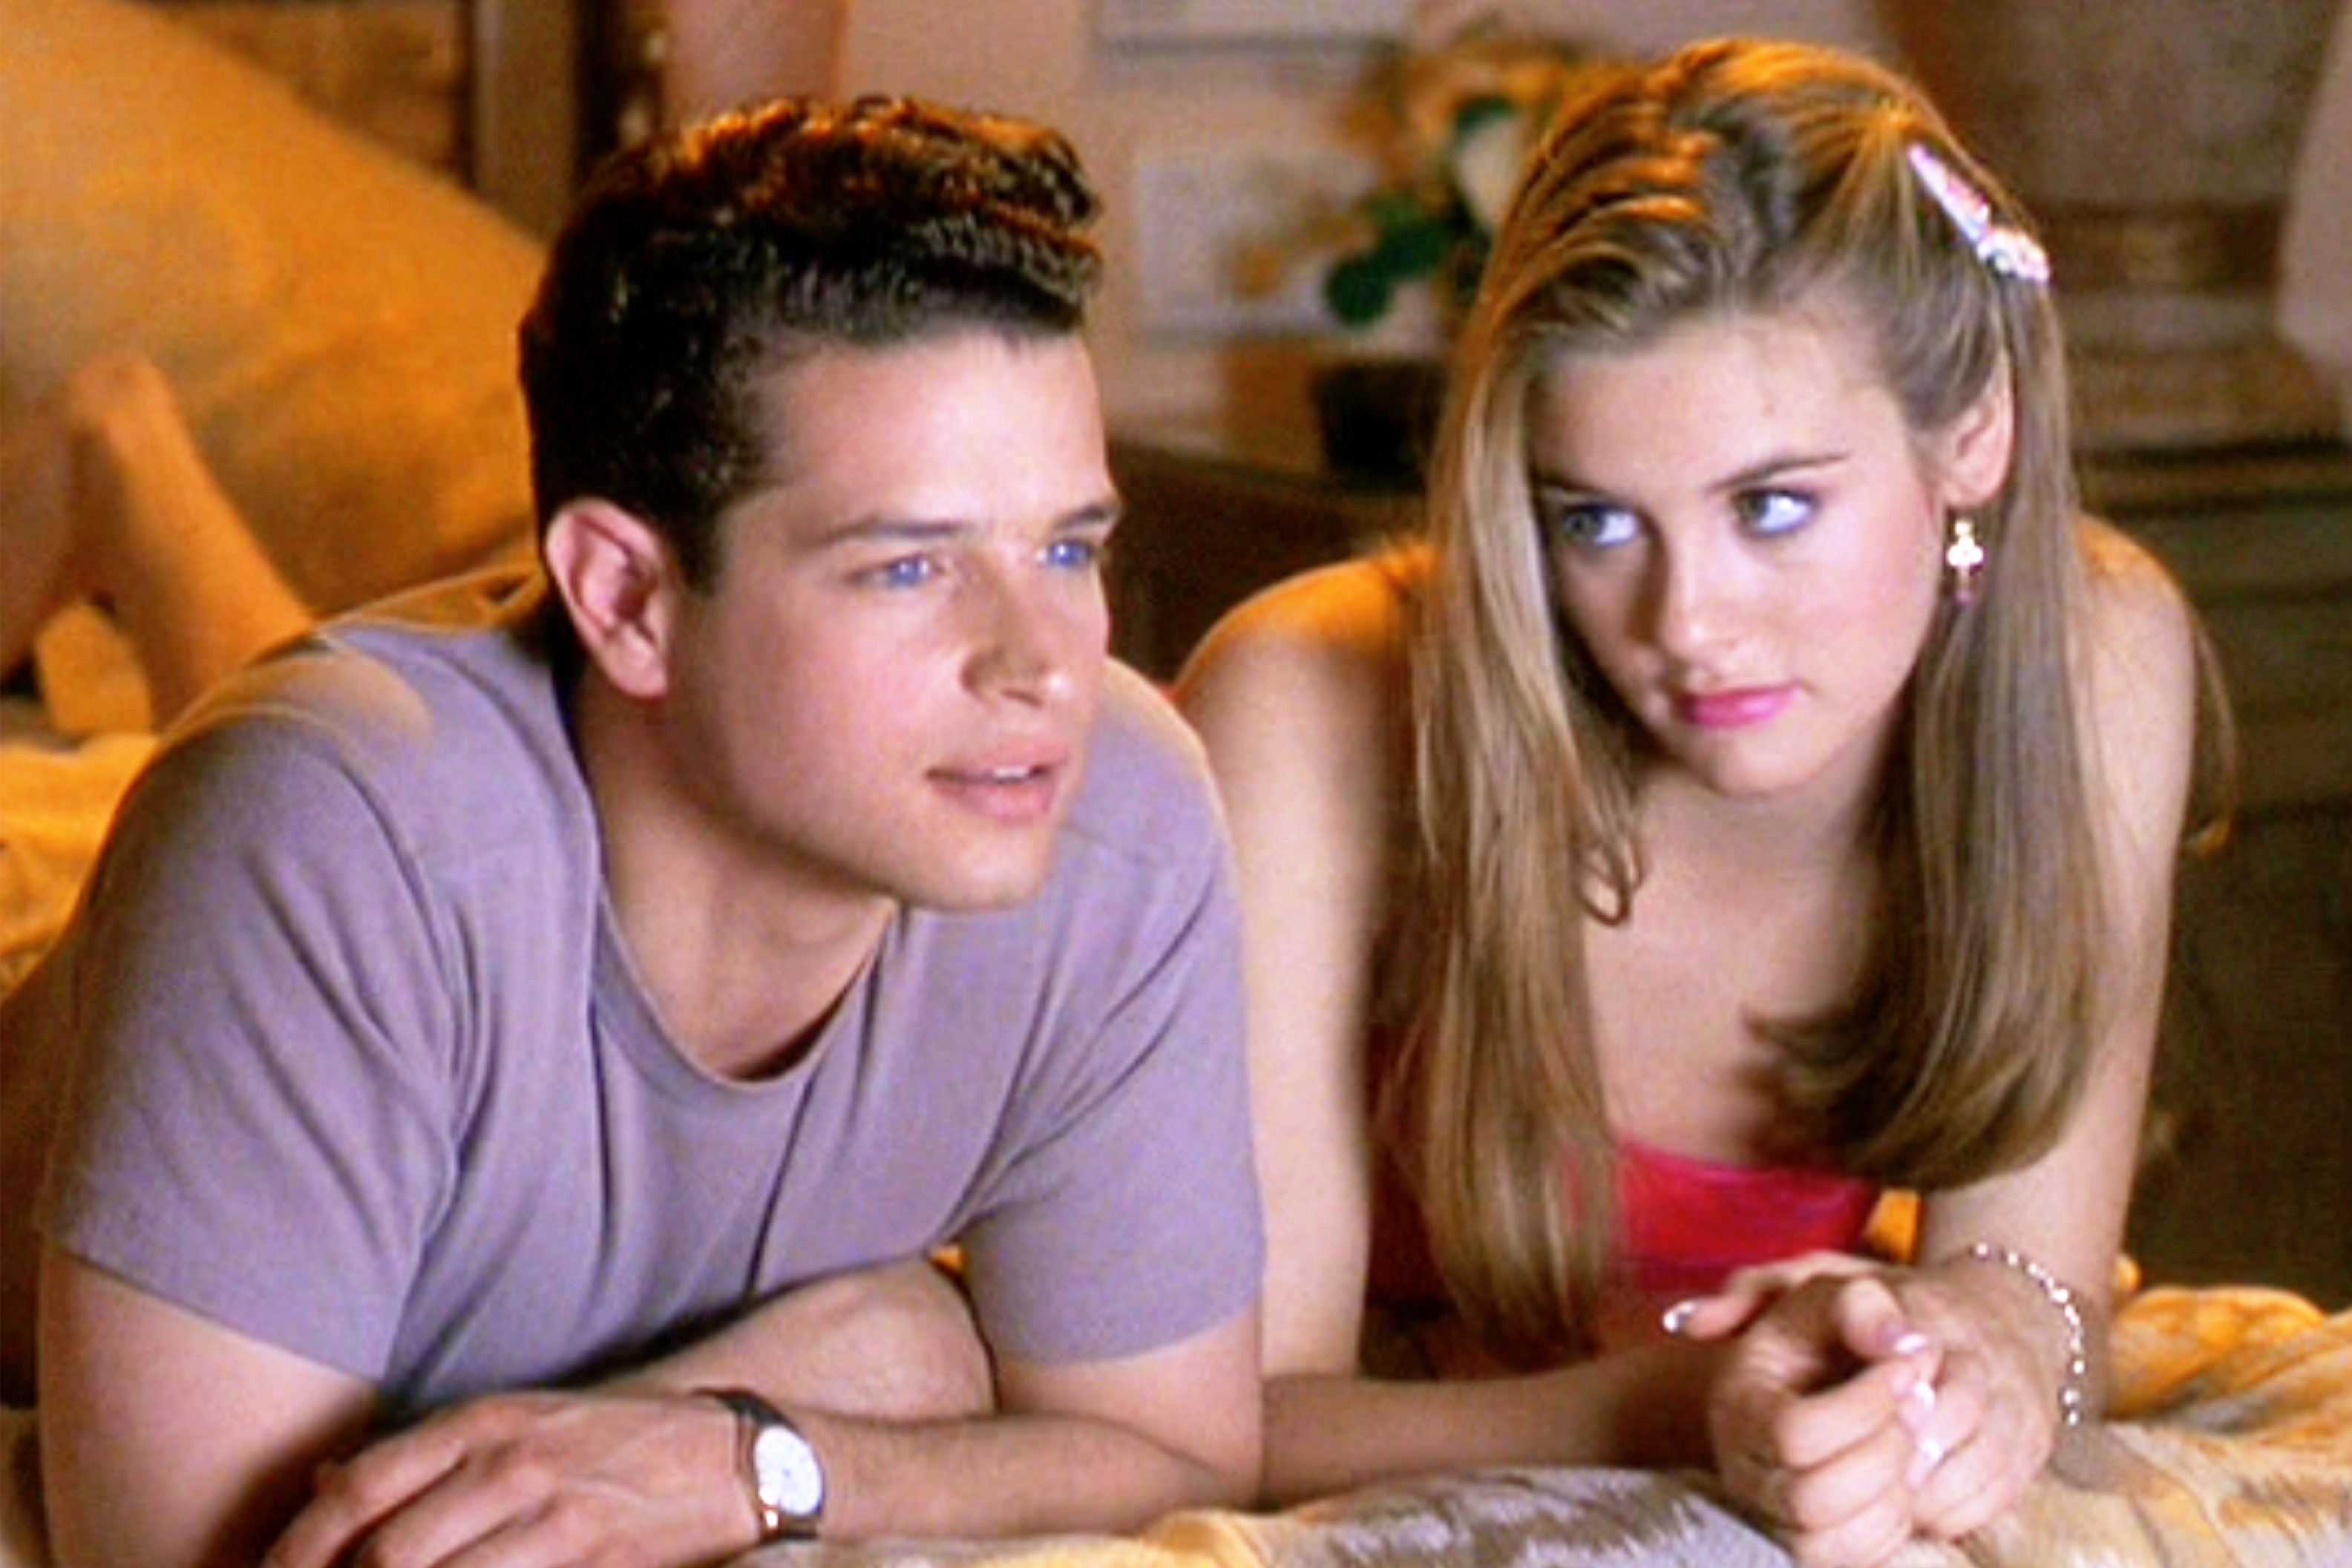 LOS ANGELES - JULY 21: The movie "Clueless", written and directed by Amy Heckerling. Seen here from left, Justin Walker (as Christian Stovitz) and Alicia Silverstone (as Cher Horowitz.). Theatrical wide release, Friday, July 21, 1995. Screen capture. Paramount Pictures.